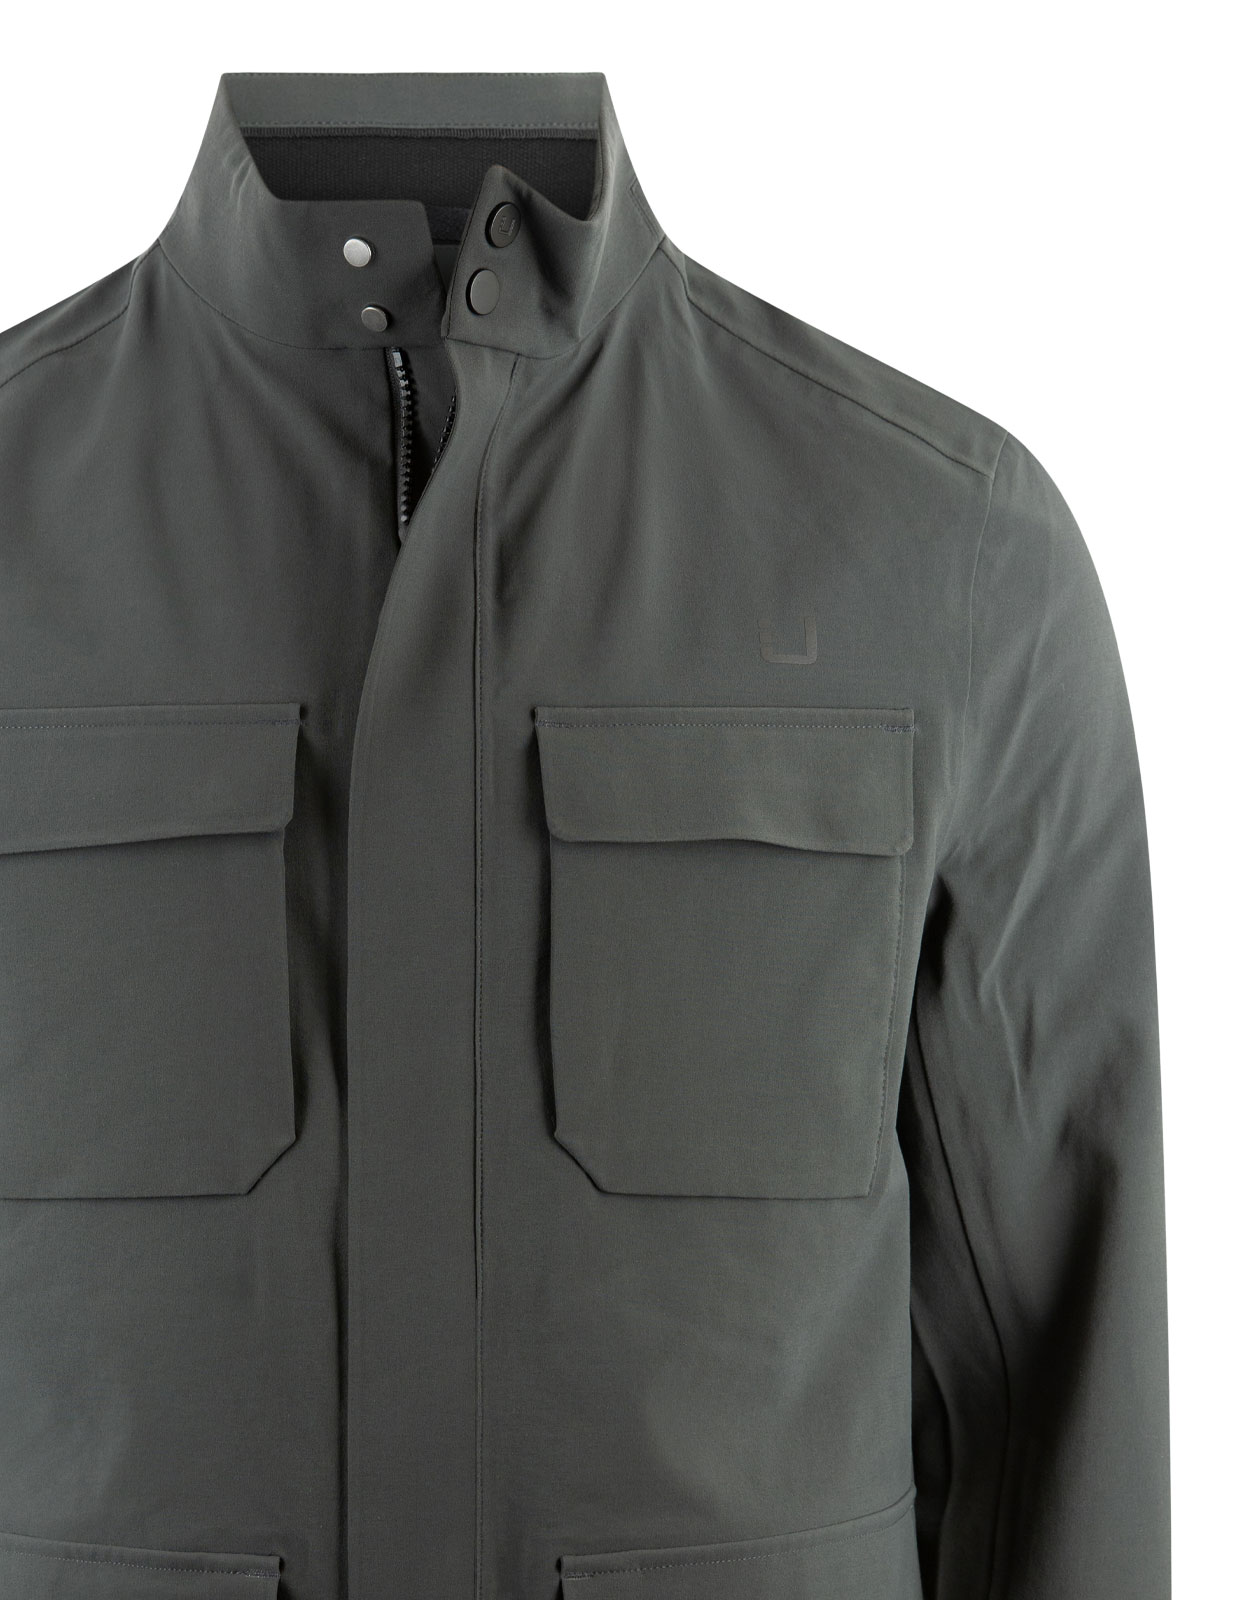 Charger Jacket Night Olive